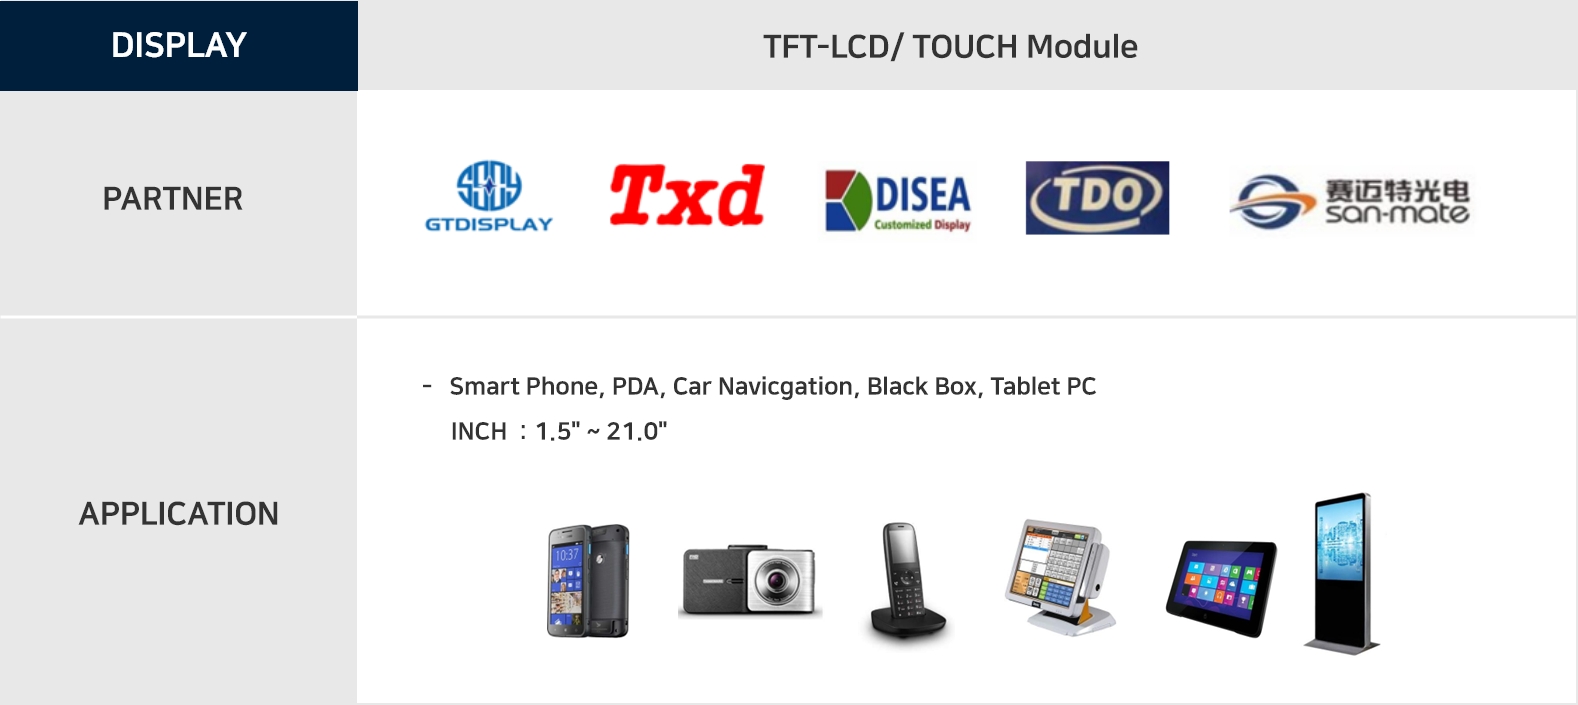 TFT-LCD/ TOUCH Module